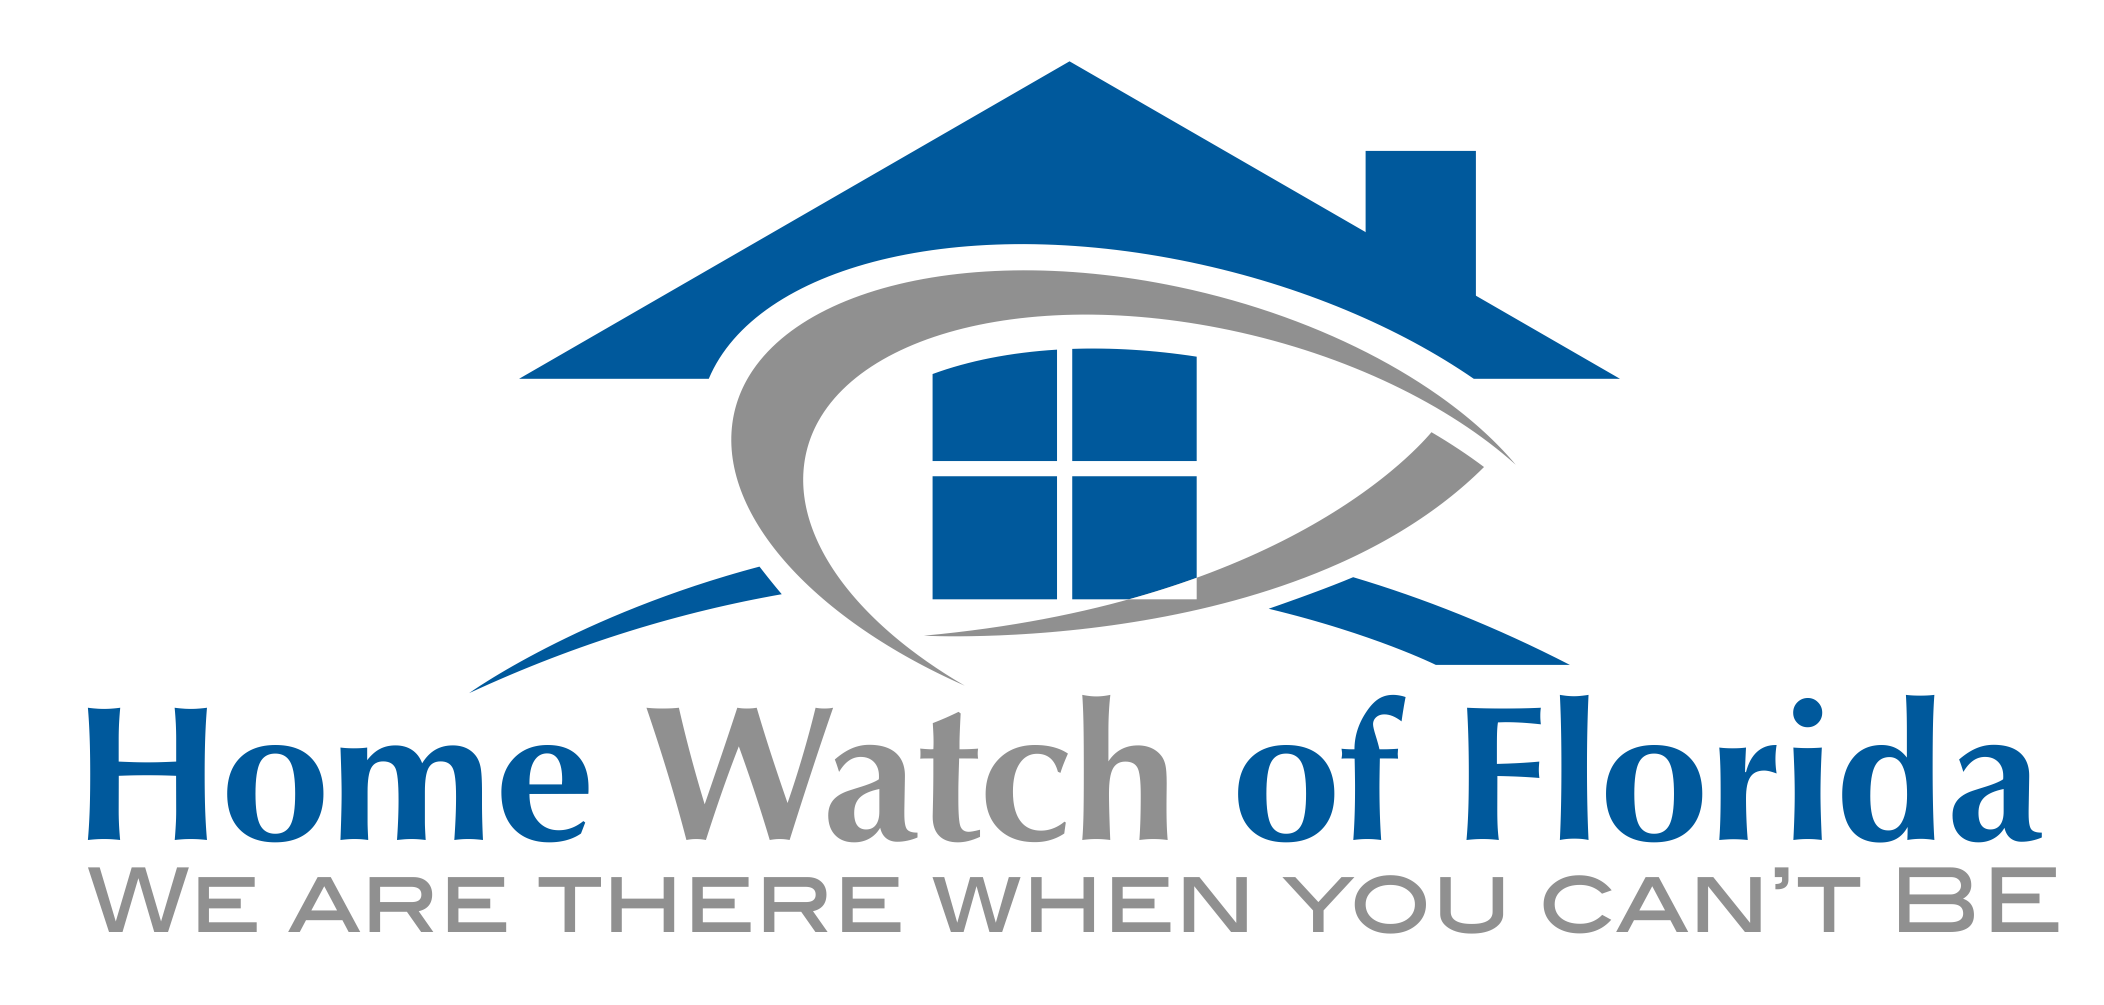 Home Watch of Florida